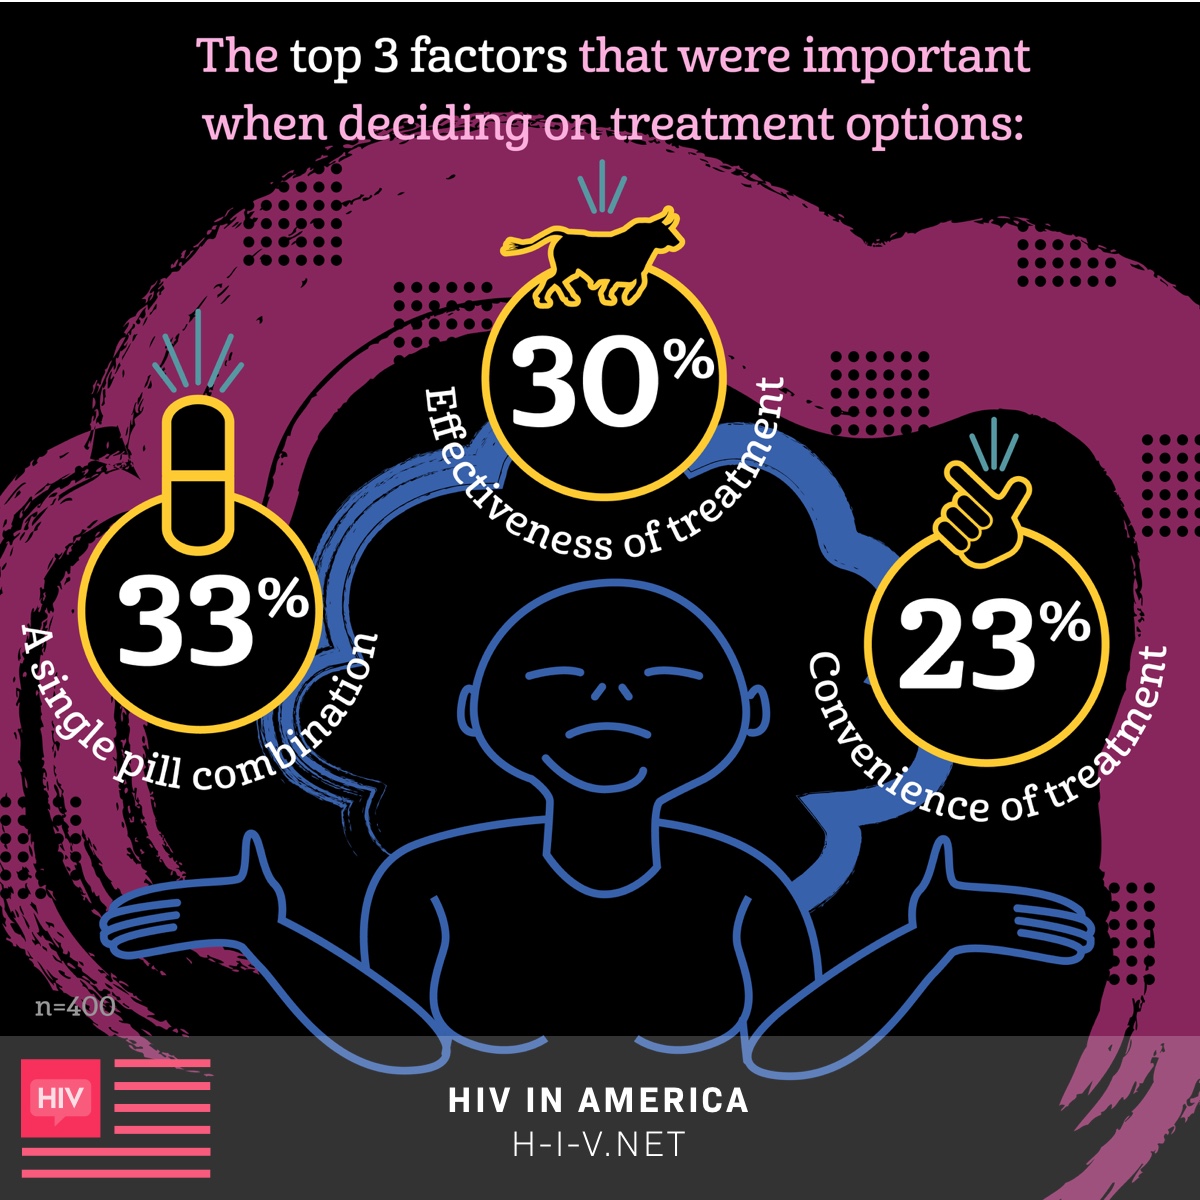 The top 3 factors important when deciding HIV treatments options are a single pill combination, the effectiveness of treatment, and the convenience of treatment.